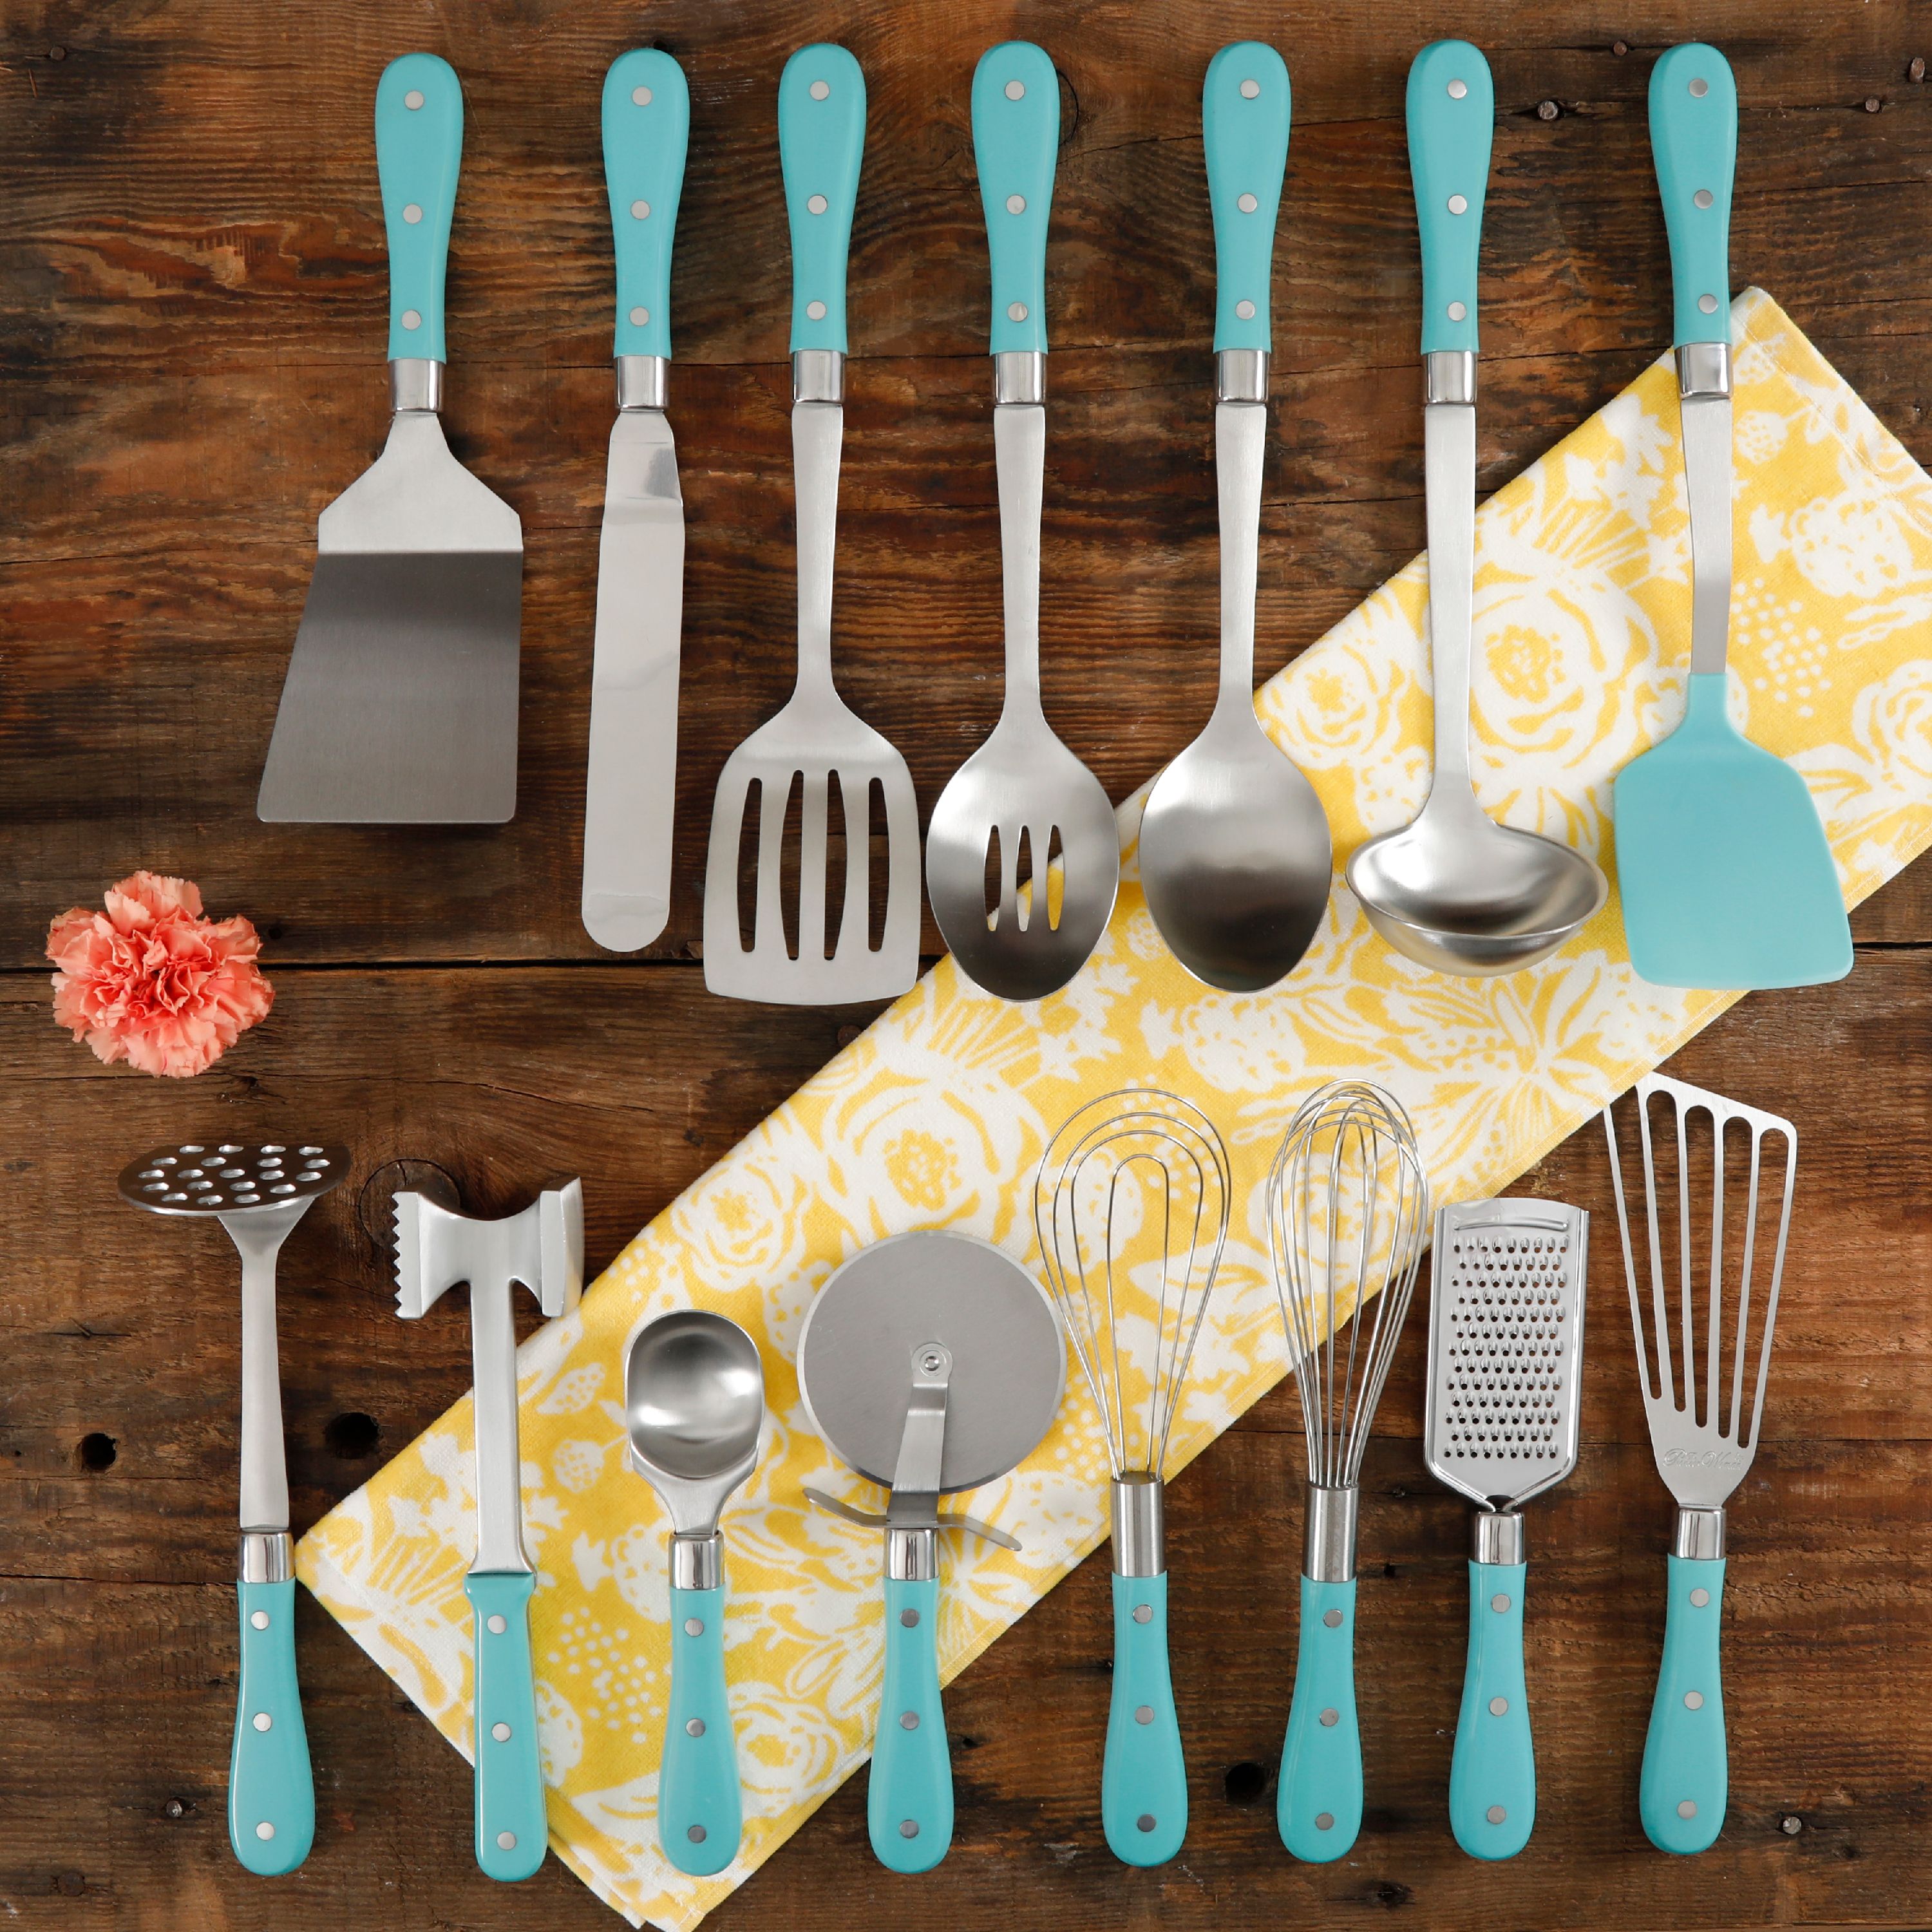 The Pioneer Woman Frontier Collection 15-Piece All in One Tool and Gadget Set, Turquoise - image 1 of 17